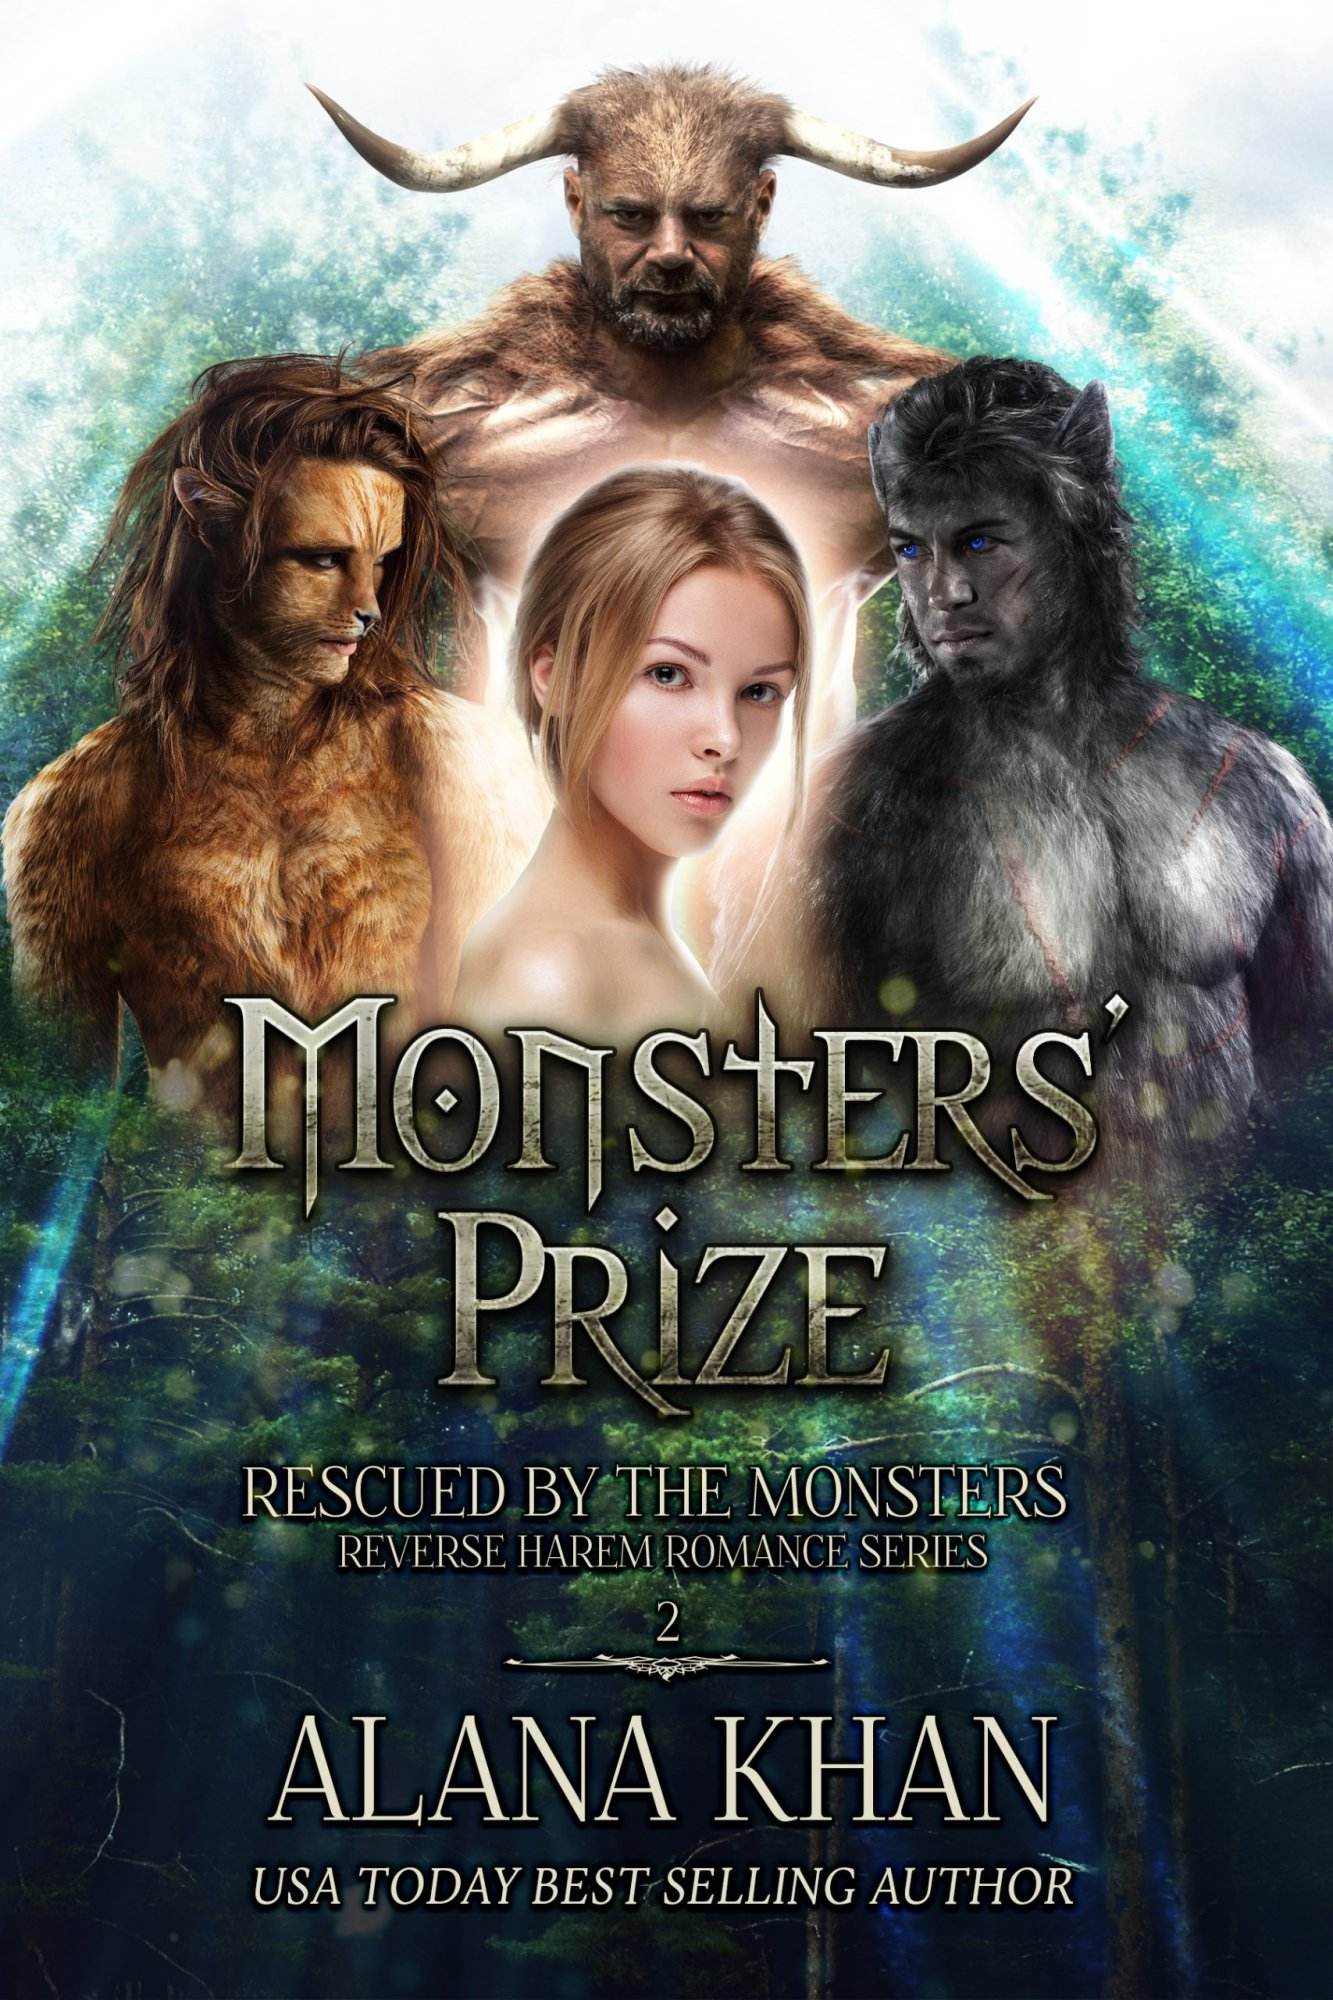 Monsters' prize